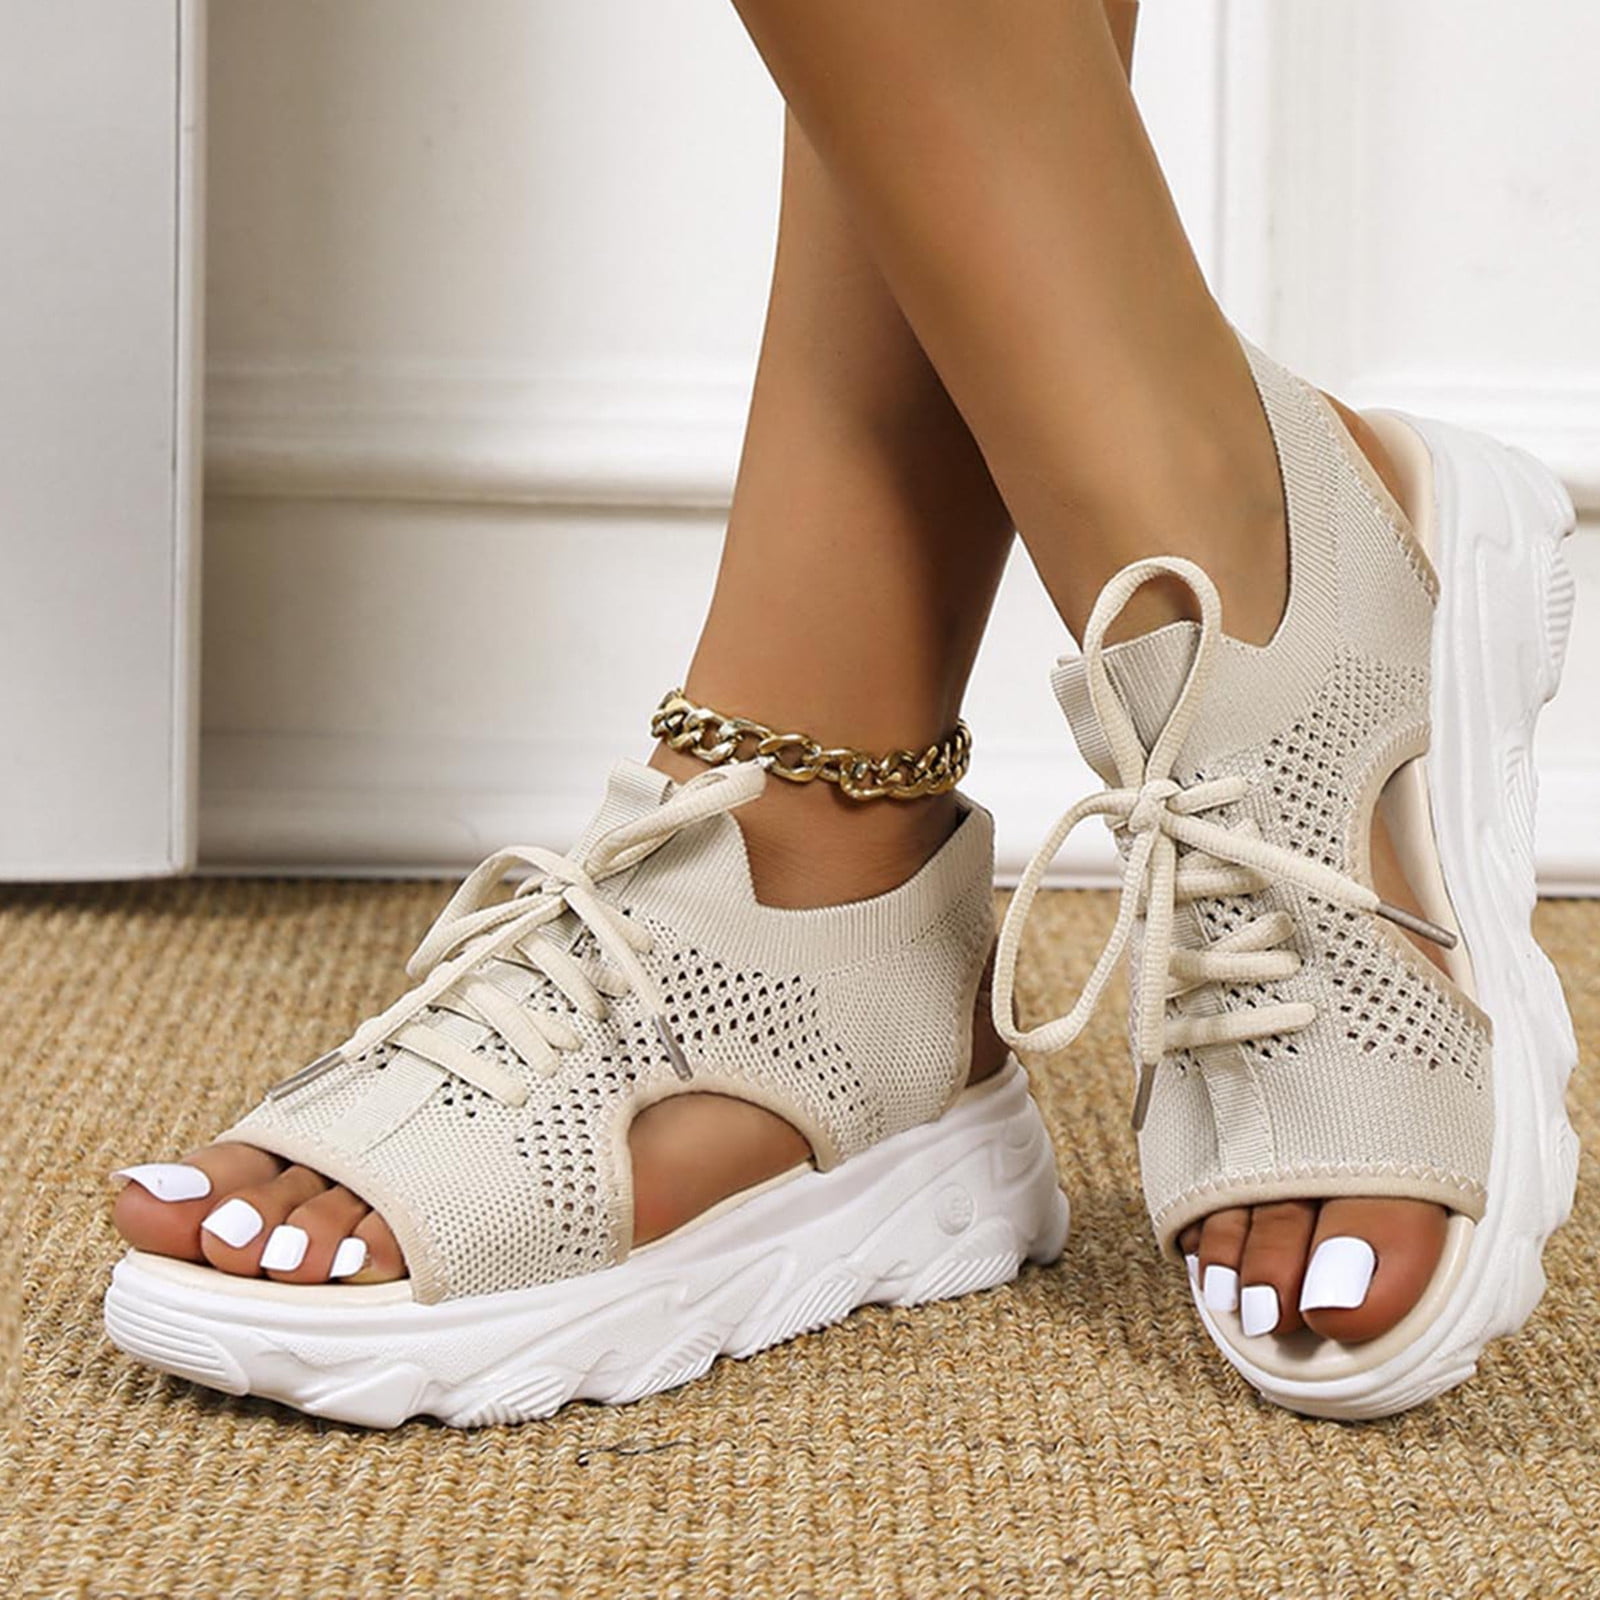 We Tested Walking Sandals and Talked to Podiatrists to Find the Best  Walking Sandals